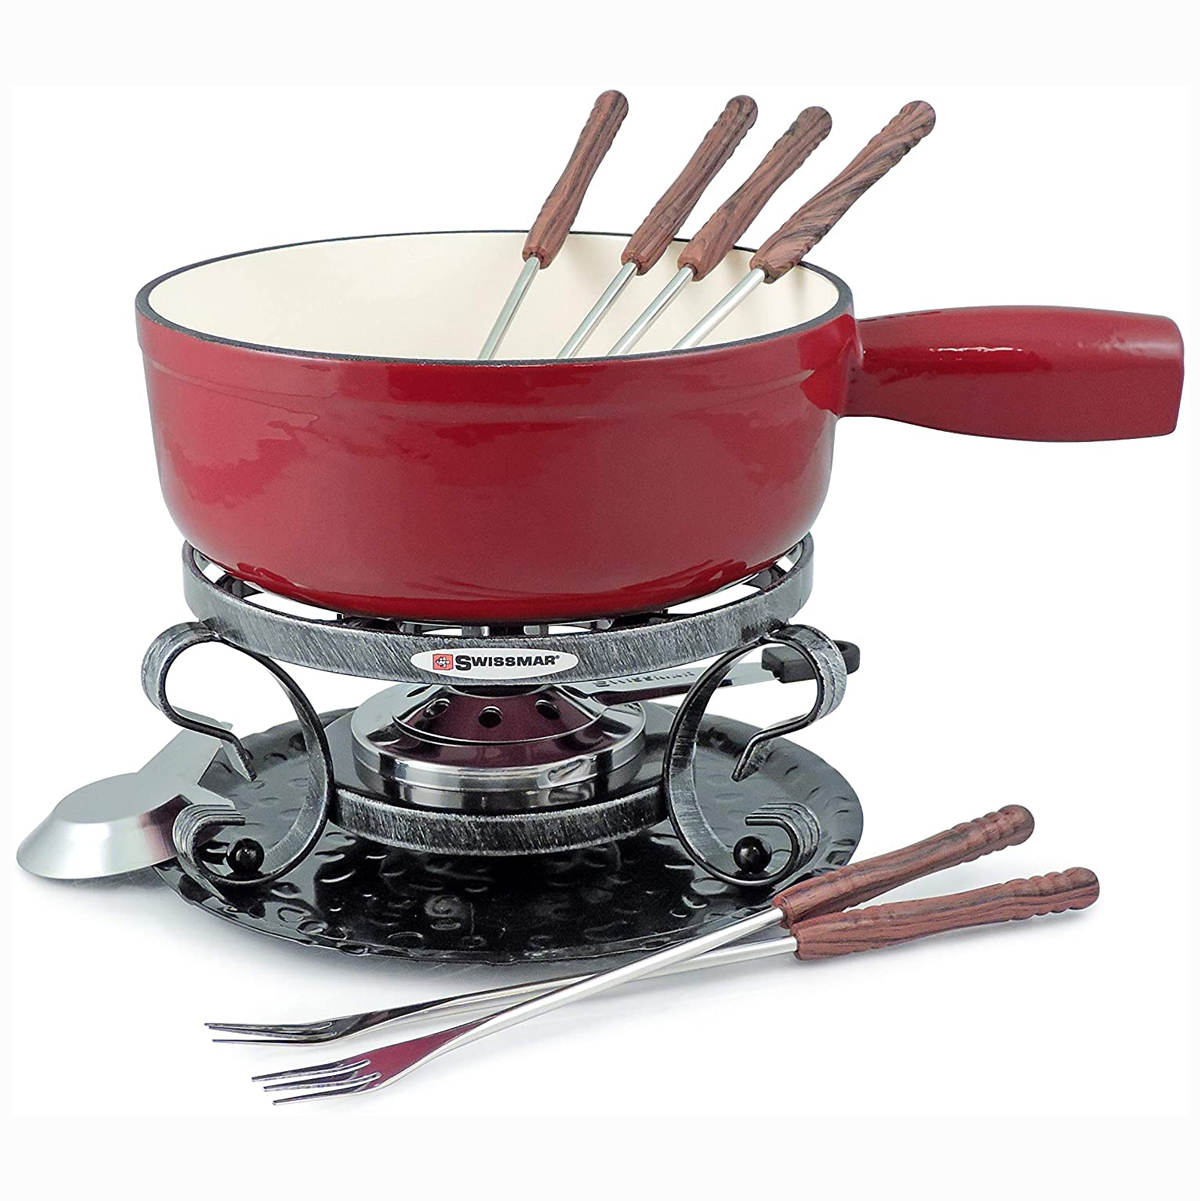 Fondue Set, The 50 Best and Enticing Gifts for Grandparents in 2022